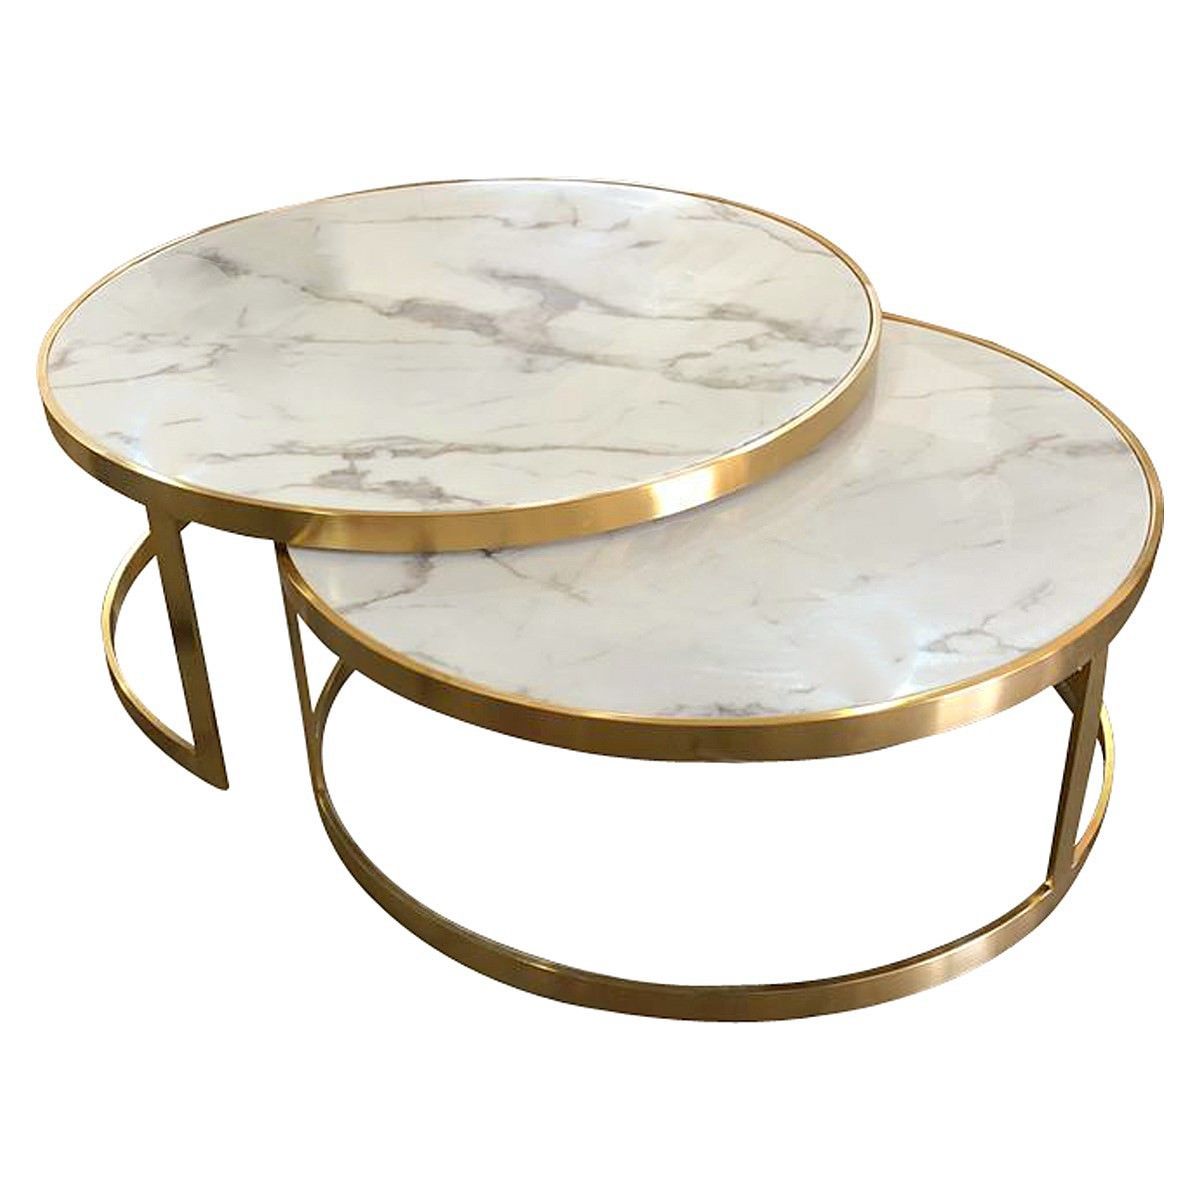 Mirabello 2 Piece Faux Marble Topped Metal Round Nesting Coffee Table Throughout Modern Round Faux Marble Coffee Tables (View 13 of 20)